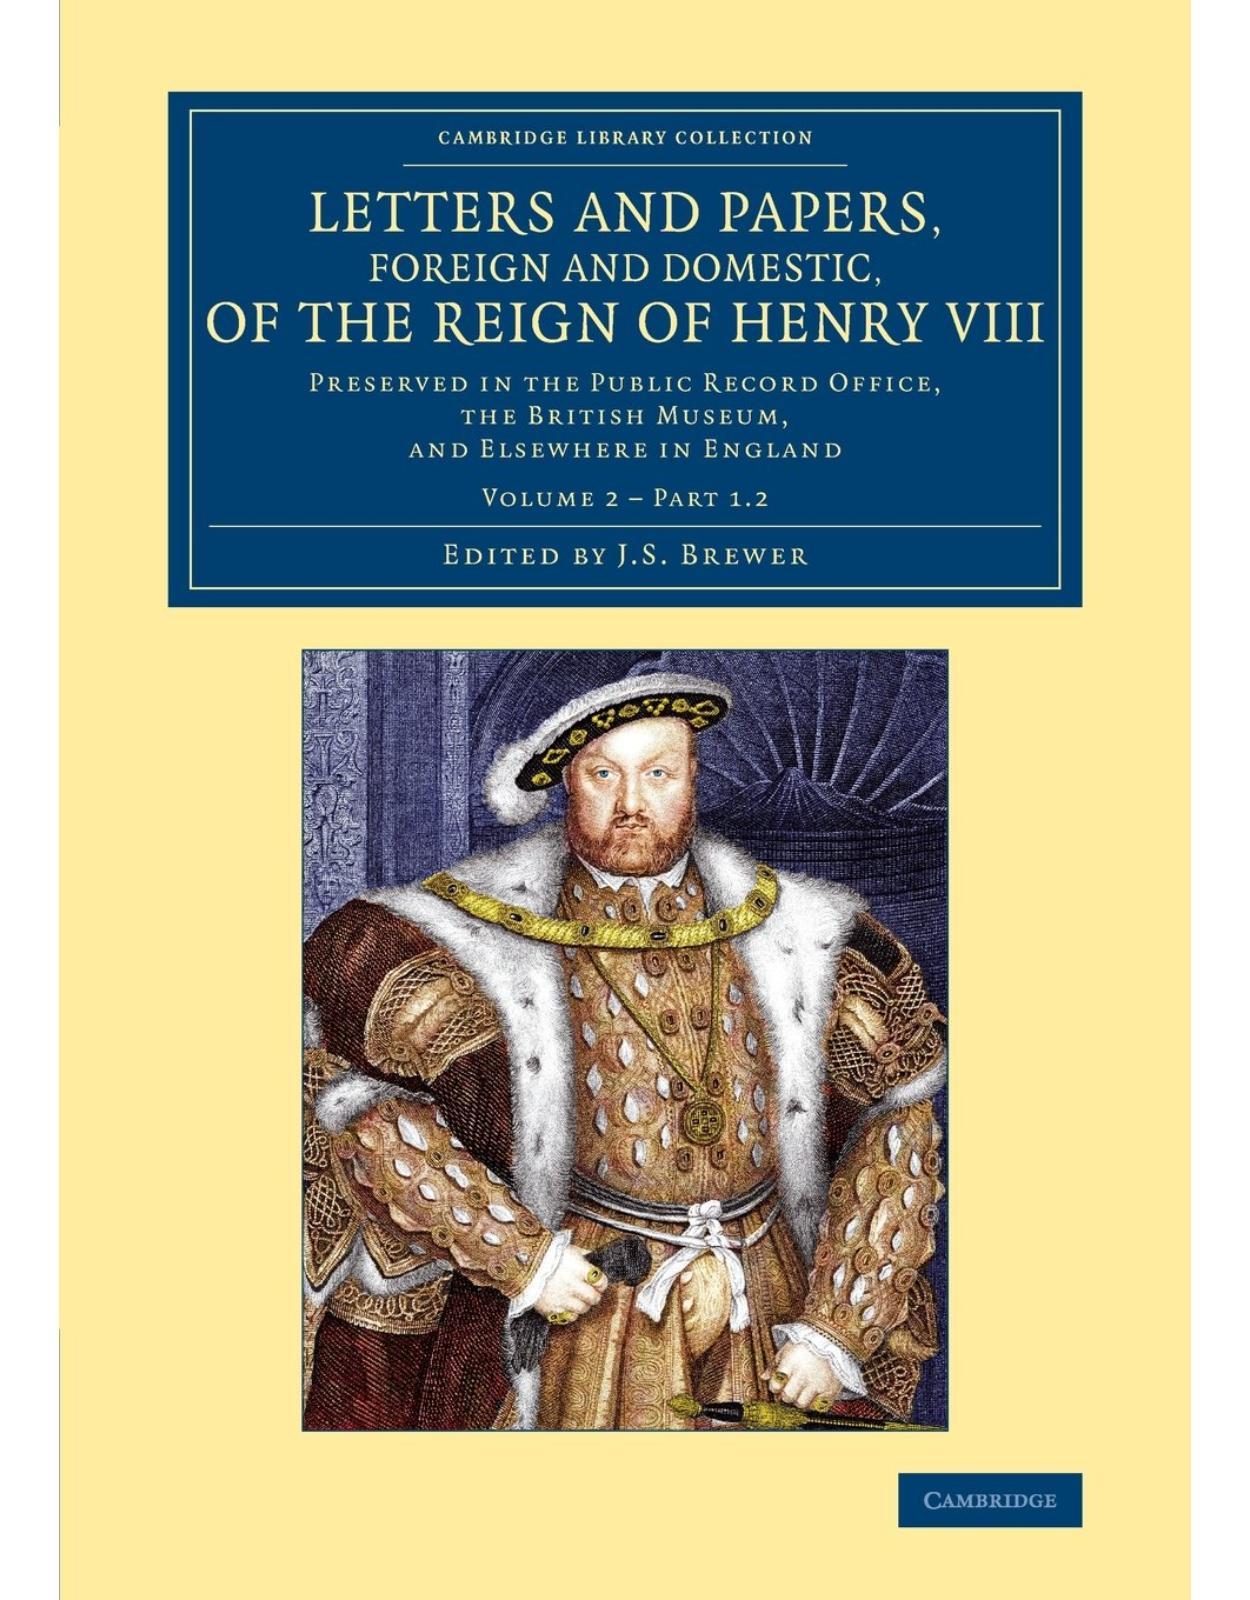 Letters and Papers, Foreign and Domestic, of the Reign of Henry VIII: Volume 2, Part 1.2: Preserved in the Public Record Office, the British Museum, ... and Irish History, 15th & 16th Centuries) 